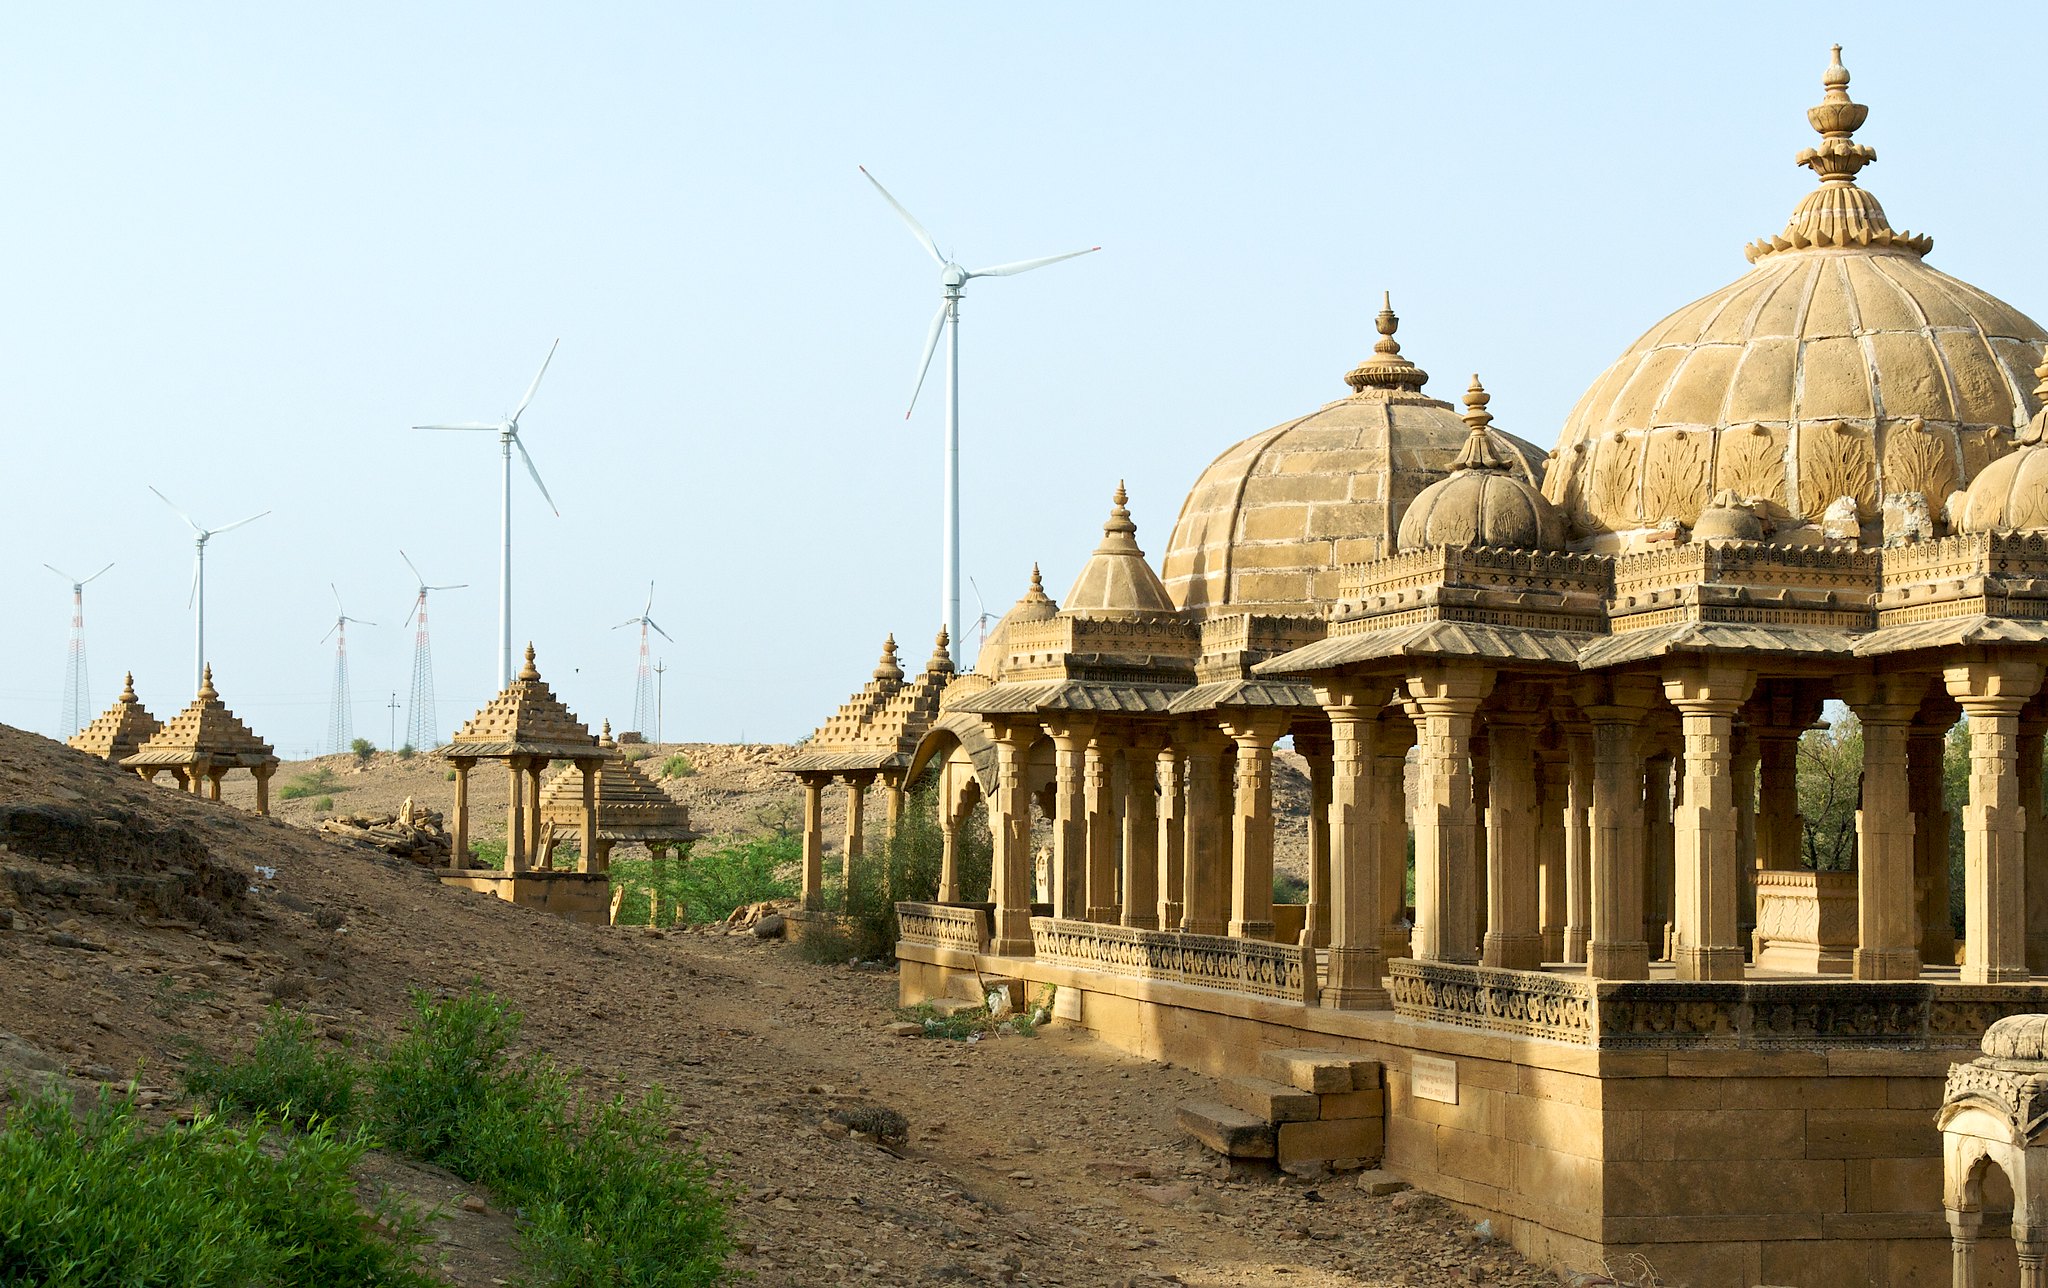 wind turbines in background of historic site in Jaisalmer, Rajasthan